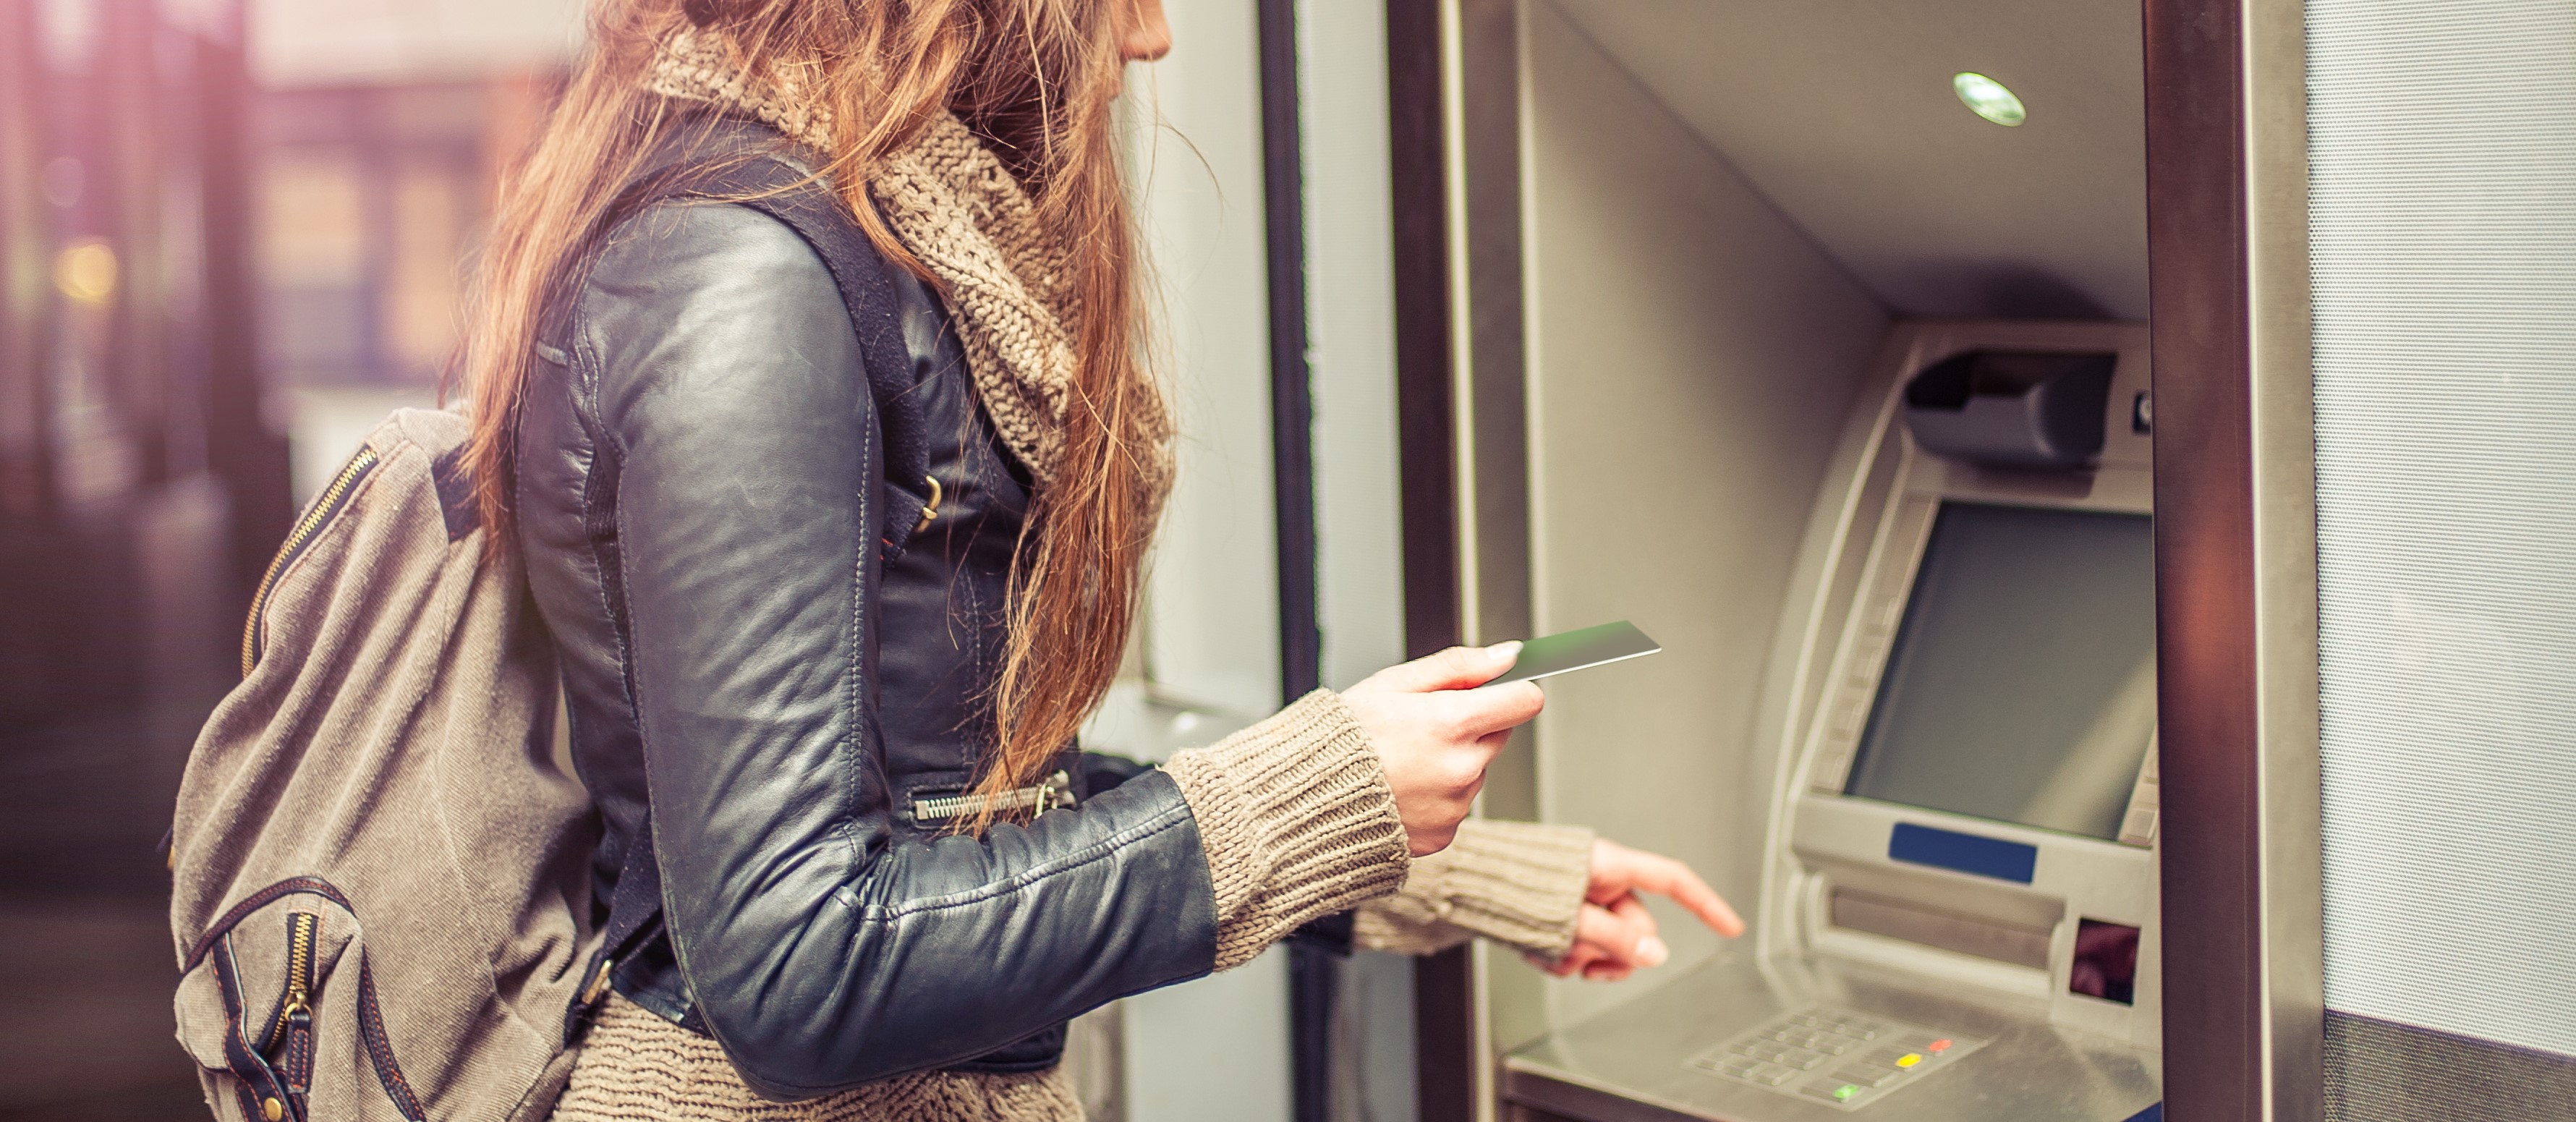 How to Spot and Avoid Credit Card Skimmers